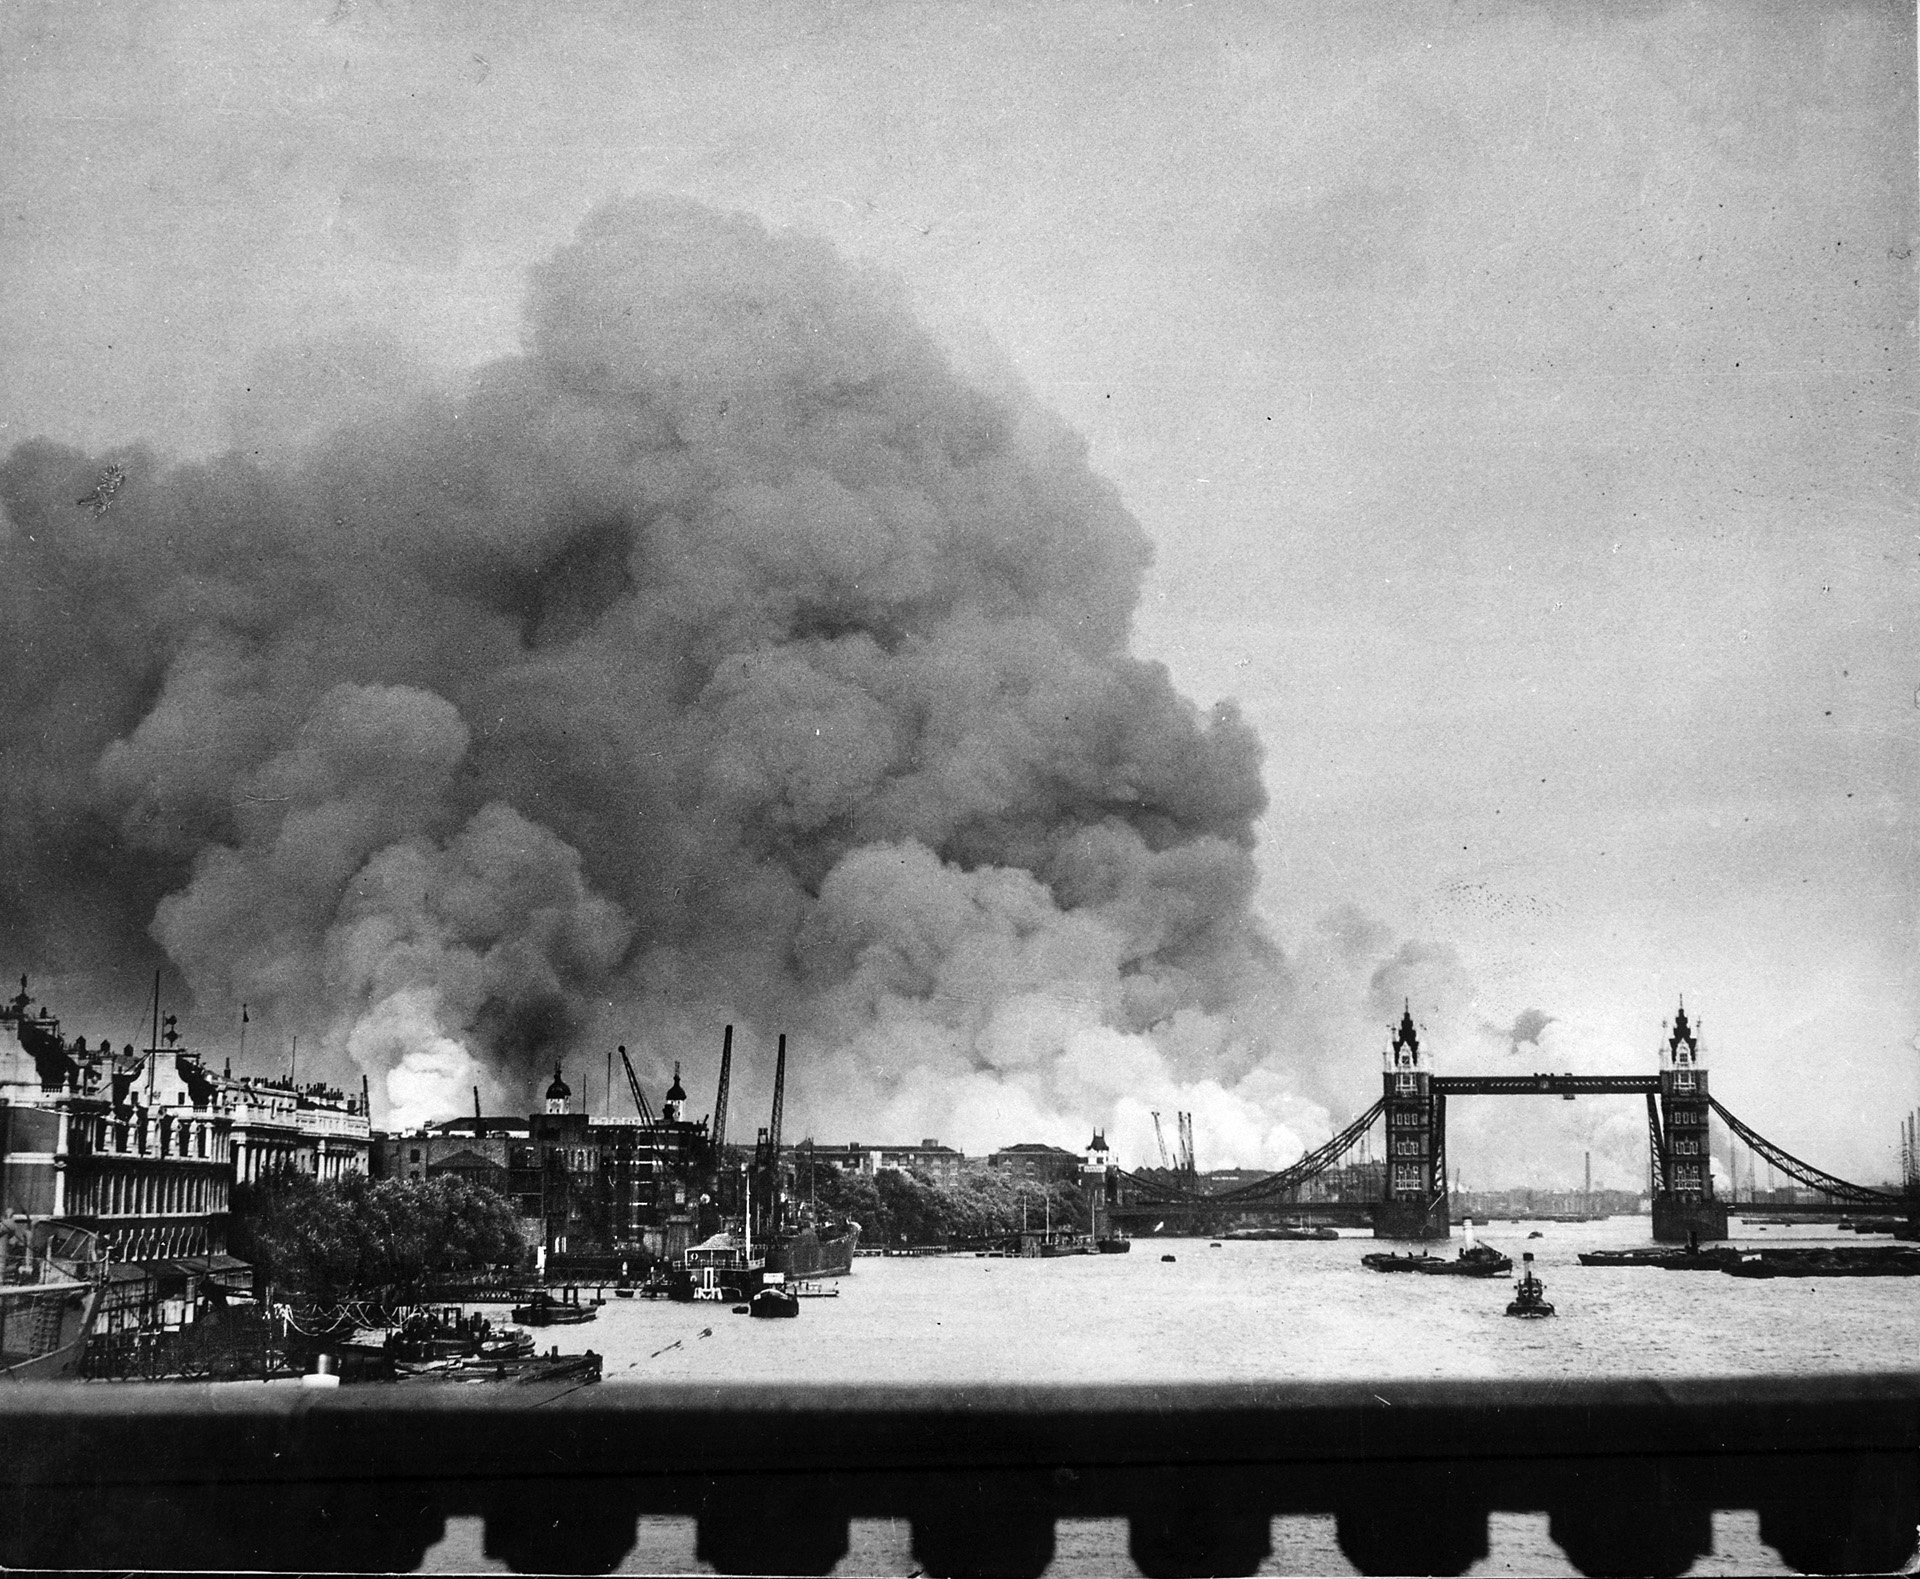 London, especially the East End, took a severe pounding from multiple Luftwaffe raids during the Blitz. Here, smoke rises above the Surrey Docks after a bombing raid on September 7, 1940—the first day of the Blitz. Tower Bridge is visible at right.